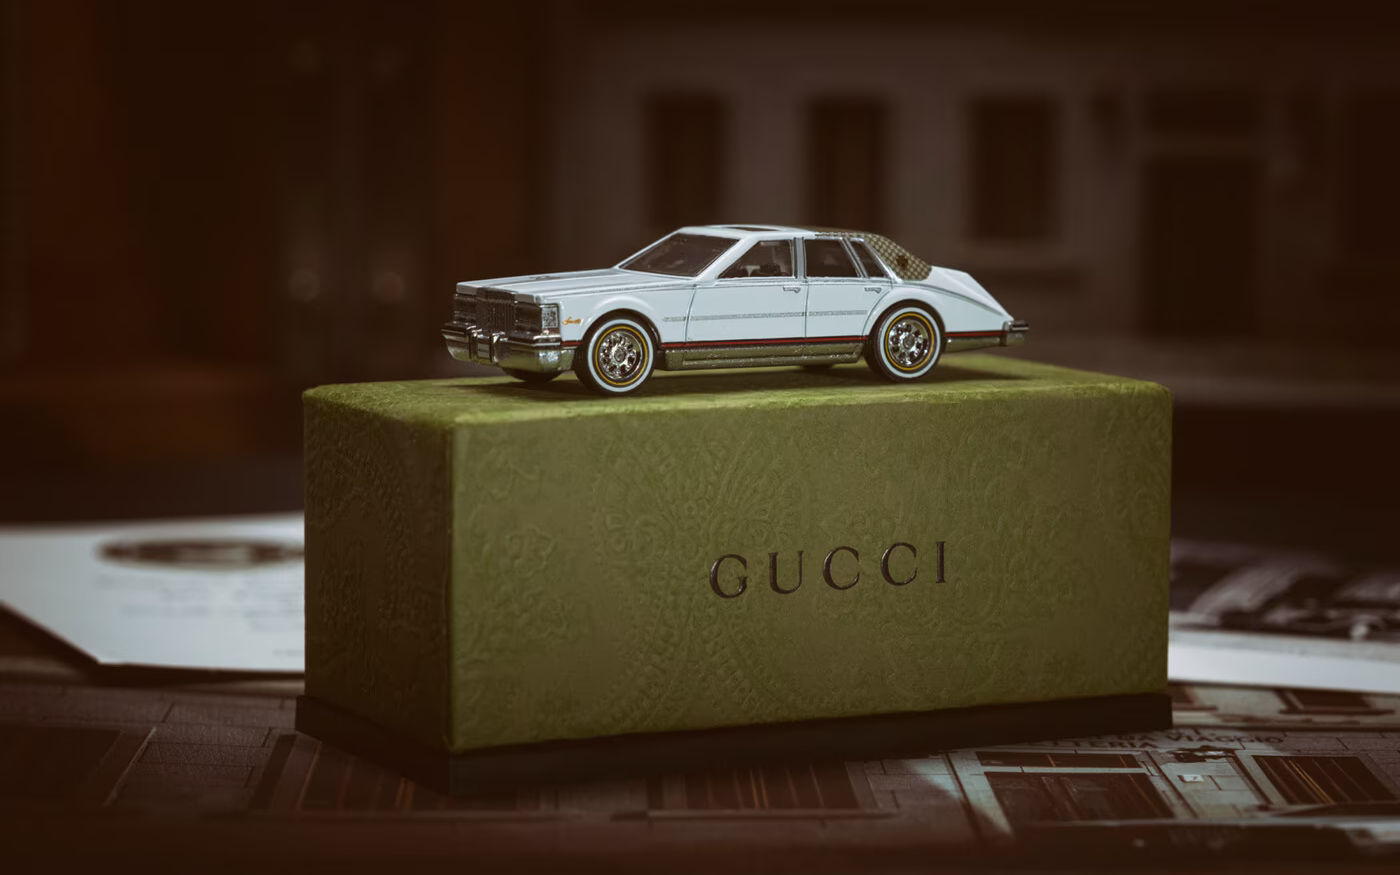 In celebration of the  gucci's centennial, Gucci has collaborated with Mattel Creations to create its first Hot Wheels collectible:
a replica of the Cadillac ‘Seville by Gucci,’ which was produced starting in the ‘70s.